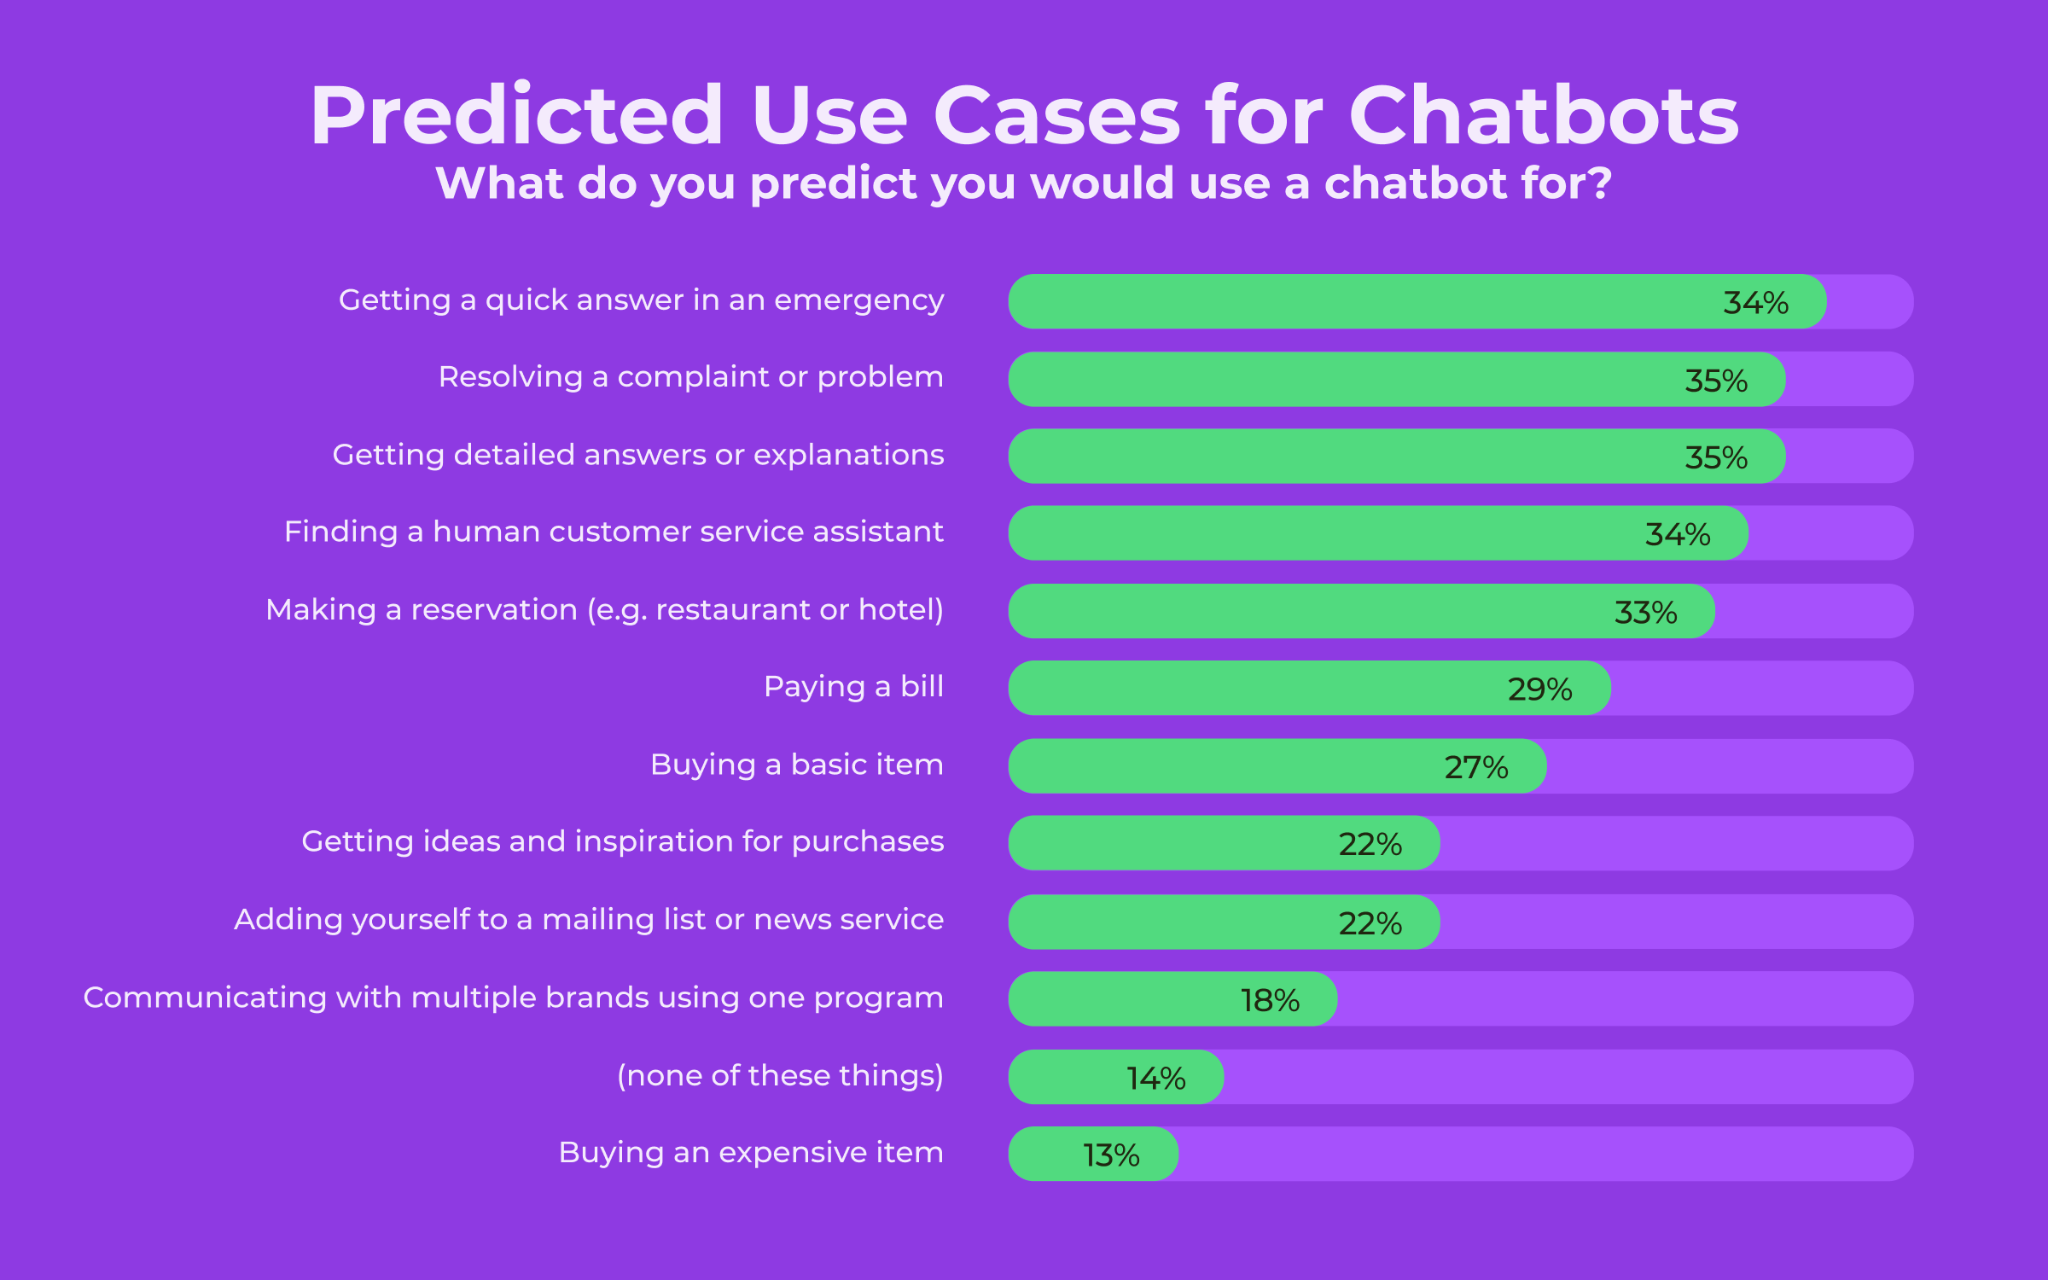 Graph showing predicted use cases for chatbots